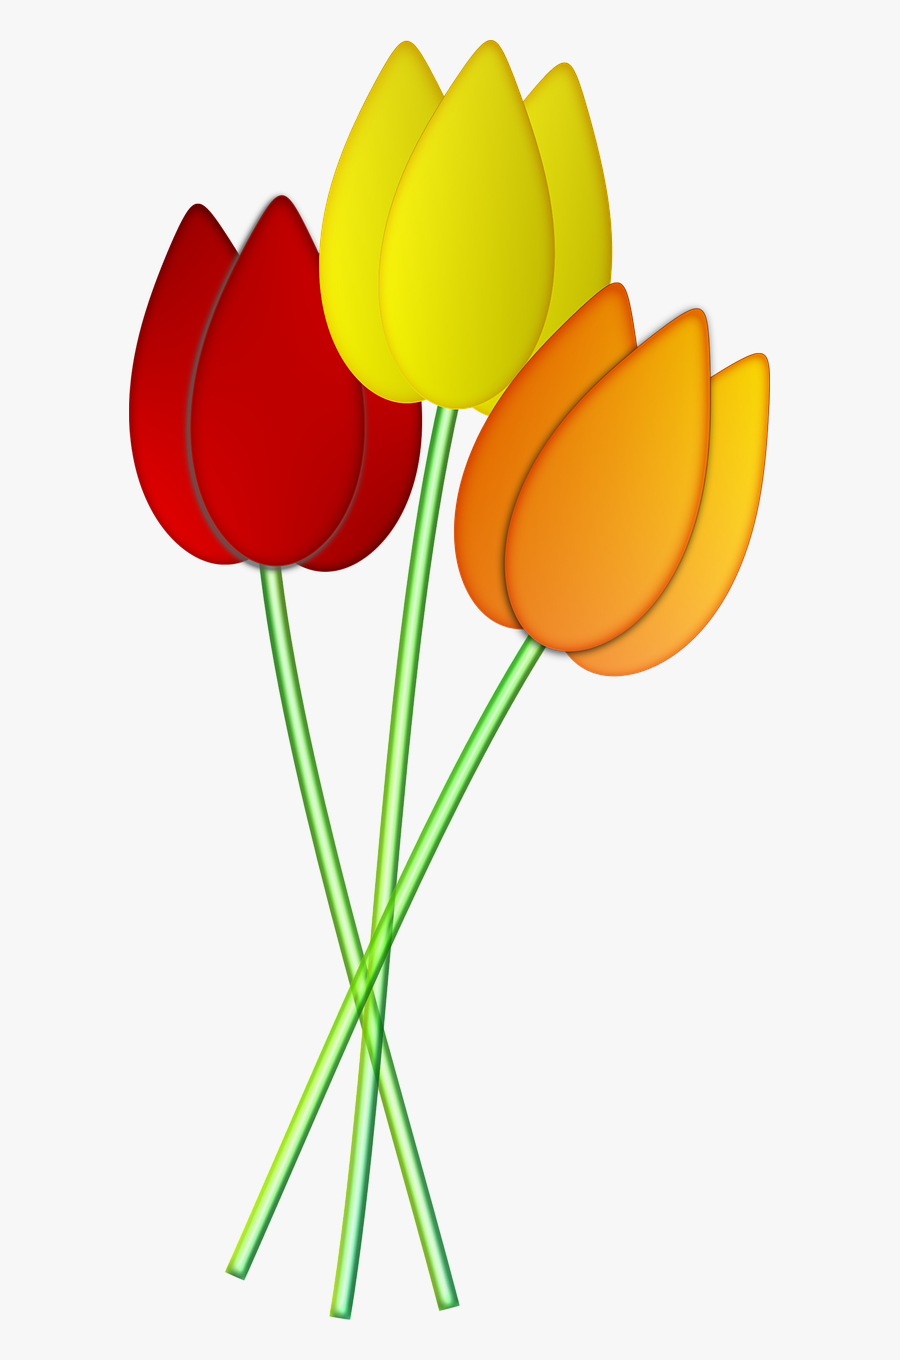 Tulips Flowers Spring Png Image - Tulips Flowers, Transparent Clipart